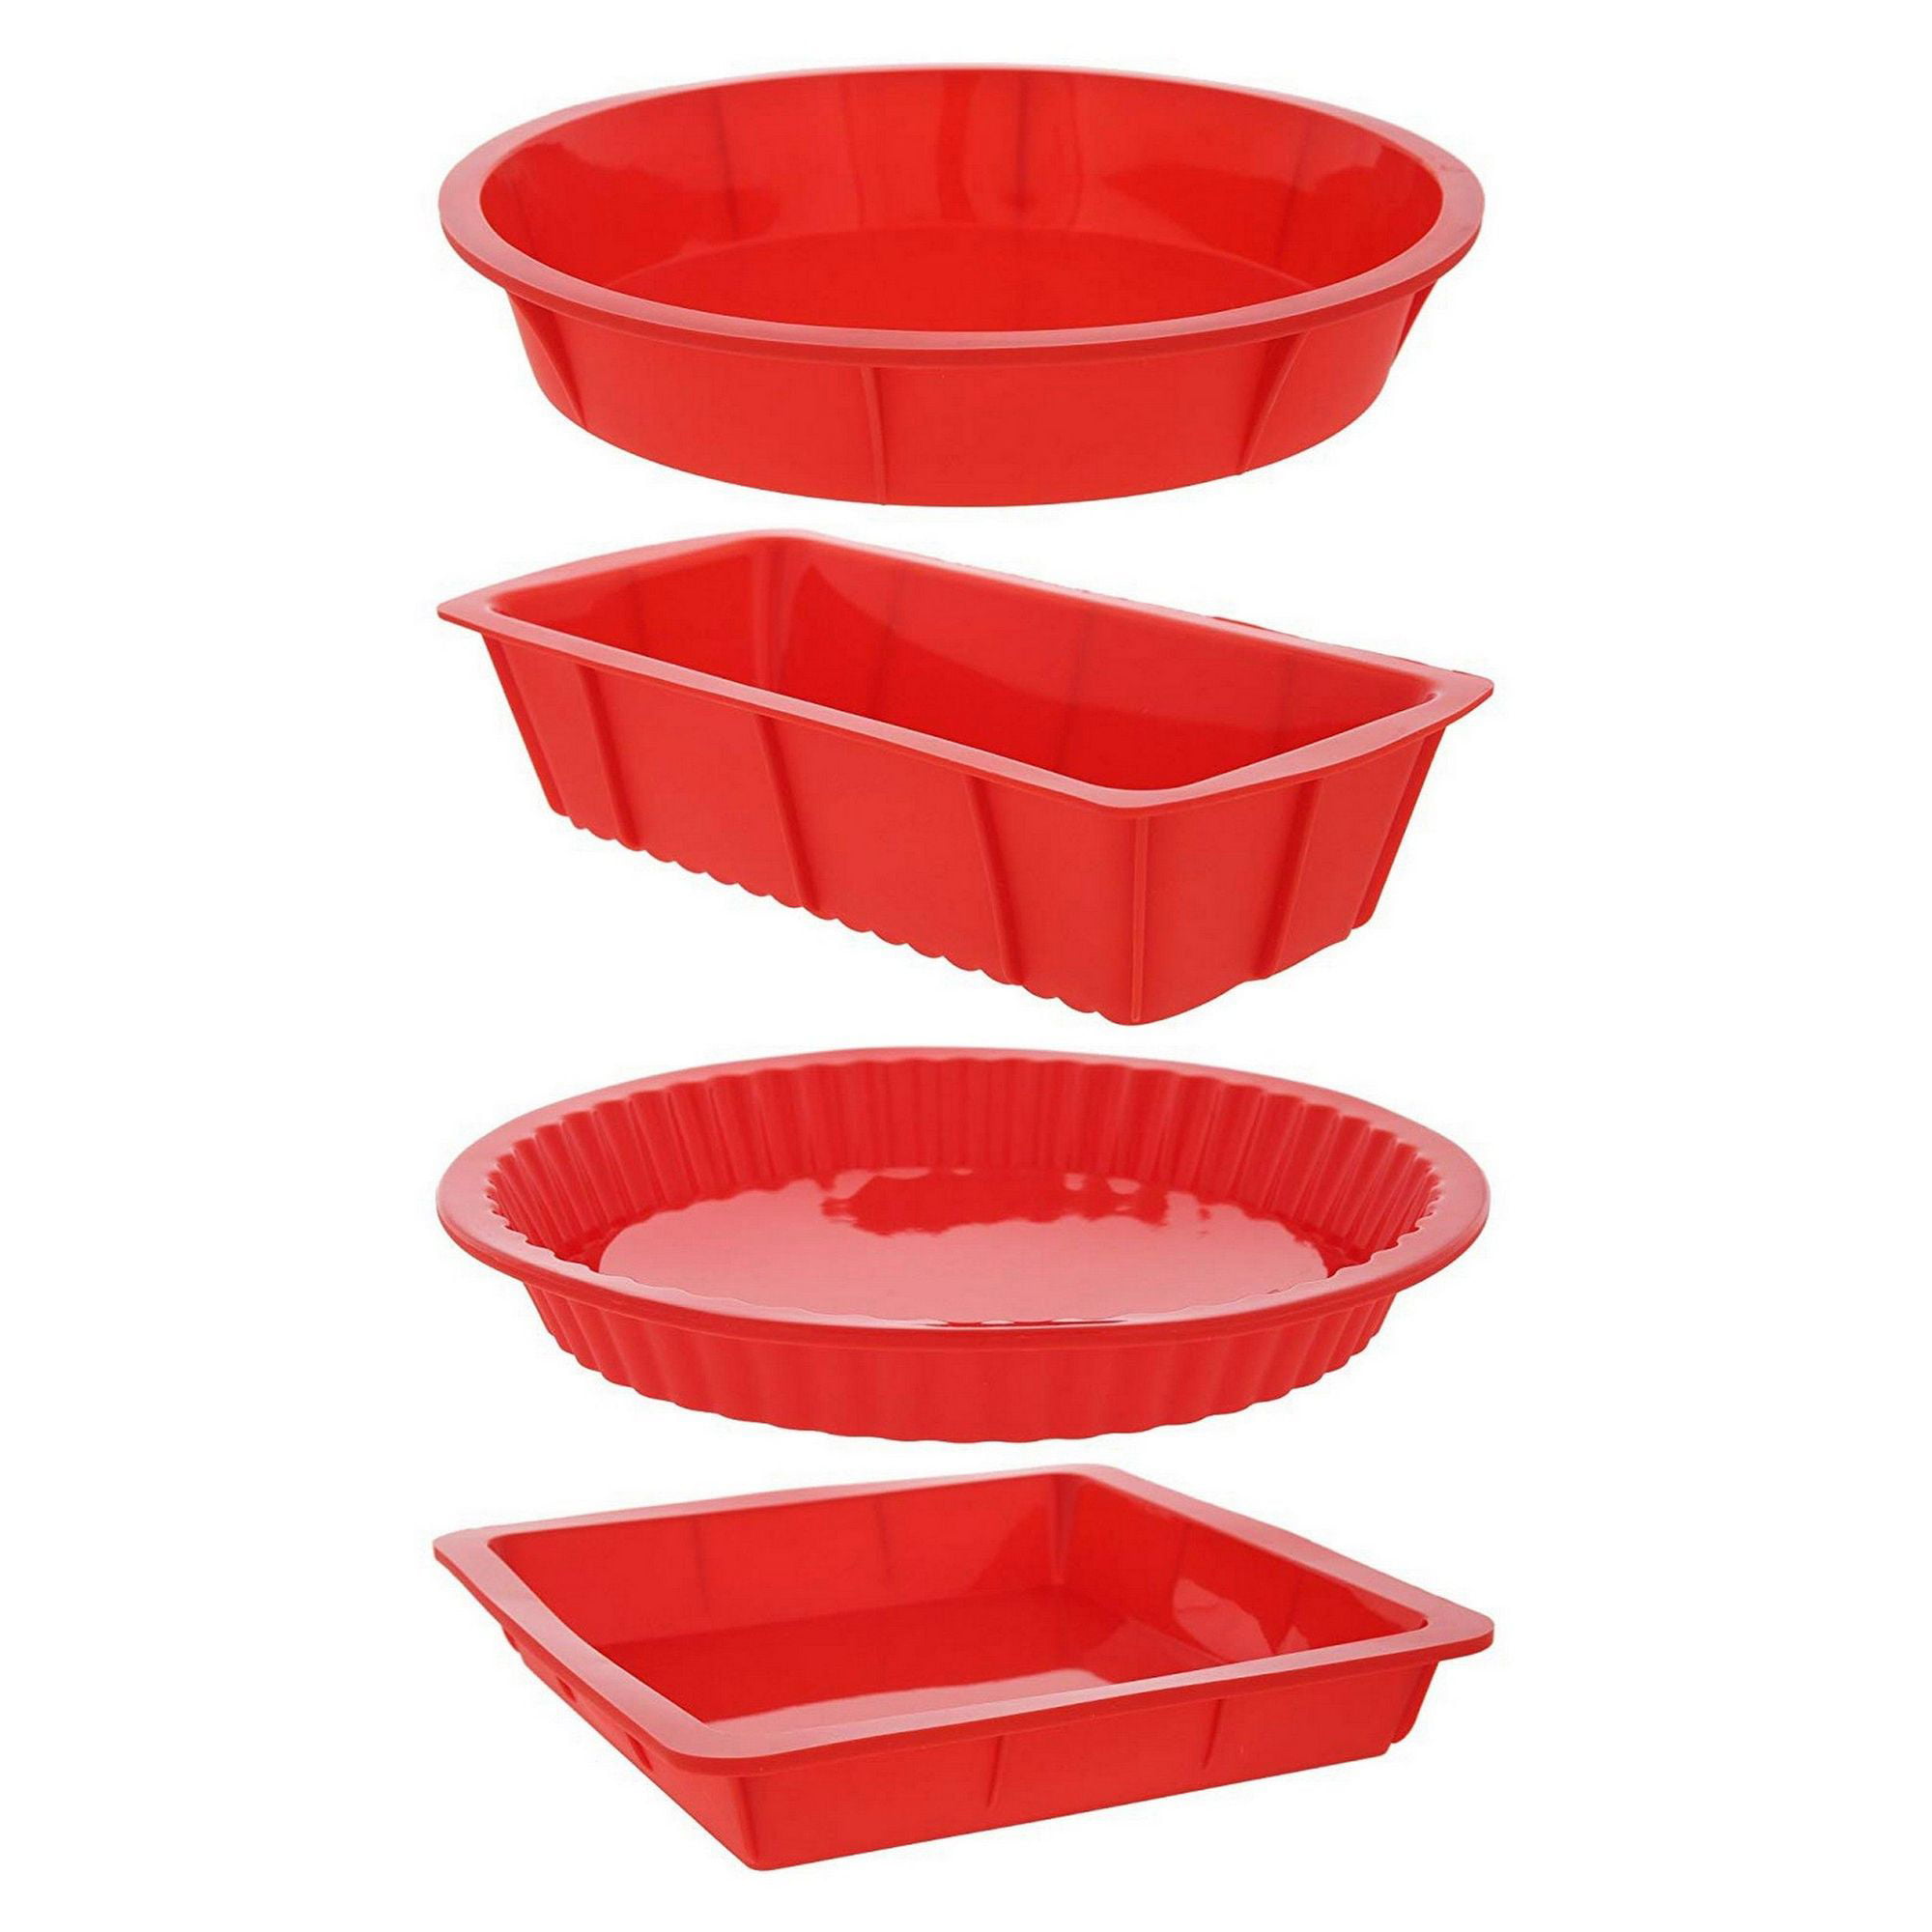 4 Piece Nonstick Silicone Bakeware Set Baking Molds with Round, Square and Rectangular Cake Mold Pan, Red